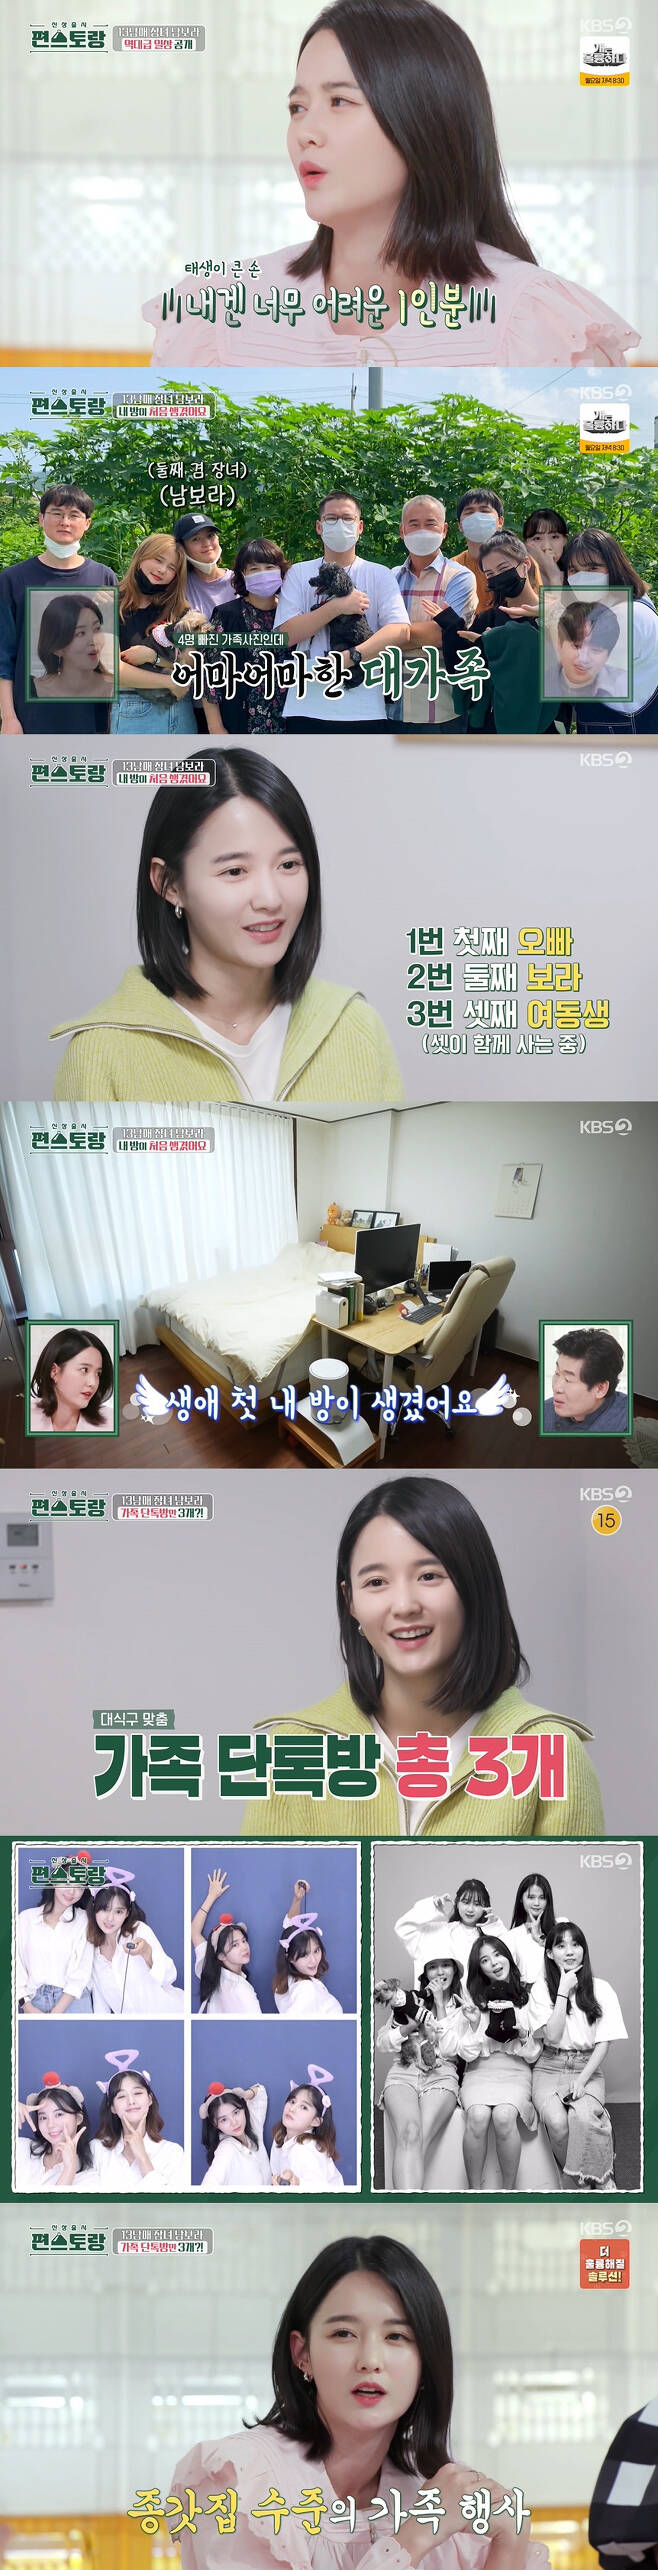 13Brother and Sister Extended family K-the eldest daughter Nam Bo-ra revealed a special family love.Nam Bo-ra first appeared as a NEW chef on KBS 2TV Stars Top Recipe at Fun-Staurant broadcast on the 7th.When Nam Bo-ra appeared on the day, the MC boom attracted attention by saying, I heard that one of the ramen noodles can not be boiled properly.Nam Bo-ra said, I always boil three servings, so I can not boil one serving. 13Brother and Sisters eldest daughter revealed the downforce.He also started Cuisine from elementary school, he said. Maybe my parents were working together so I had to take care of my brothers or I should have done Cuisine when I was hungry.And my mother also had a lot to see and learn from the restaurant, he said.Nam Bo-ra, who moved a month ago, lived in an empty living room without a TV and a sofa, and he wondered, The house I lived in before was full of living rooms.I didnt buy a couch, I didnt put on a TV. I dont have anything to take a break at home, he explained.Nam Bo-ra, who is currently living with his first brother, third brother and three Korean independence movements, said, I moved to this house and took my room for the first time.I wanted to arrange it with warm-toned furniture, and I bought my futon for the first time, he said, introducing the room I had for the first time in 35 years.On the other hand, Nam Bo-ra had a Korean independence movement in his home town, but he was busy communicating with his family from the morning.There are 14 people in Dont bother because the families are all in, he said. There are three Family Dont bothers, including the whole Family room, the sisters room, and the residents room.Once you open it, sometimes you get 100 to 200 messages.Nam Bo-ra is an extended family, so its hard to get Family Event. I get birthdays and graduation ceremonies, but I do not get the entrance ceremony.I do not want to go to school on the same day, he said. I have a lot of Family Events at the level of my family. After a morning conversation with the family, Nam Bo-ra went to the kitchen and started making side dishes for the extended family.13Brother and Sister the eldest daughter, he has done a lot of housework since he was a child. I think I learned it by doing life-style Cuisine.On the day of the brothers picnic, I packed 30 ~ 50 lines of kimbap. He said, My mom once made a basic 10 servings of Cuisine.I have 10 handbags, so I make it big enough to fit my hand and share it with my family. Nam Bo-ra was the first to make bean sprouts flavored with two heads.He made a bean sprout in an instant with a quick hand like a housewifes ninth stage. He said, I have three houses in my house, my brothers house, and my parents house.Nam Bo-ra then made cucumber delicacies, eggplant, eggplant, and radio. In the meantime, Nam Bo-ras friend called and gave child care counseling.Nam Bo-ra, the K-the eldest daughter who raised the brothers himself, gave me a hard time with a child-rearing force. Its good that the brothers do not open their hands to me now.Feelings to live a second life, he said, time really goes fast, he did not spare any advice.Nam Bo-ra finally made his youngest favorite sausage. He said, I hugged him and he looked really cute. So I went home after school and saw my youngest.When I was a child, I used to go to the hospital if my child was sick. I am not a mother, but my brothers are too young, so I call them mom + sister. Brother opened the exhibition a while ago, and I was delighted and proud. I still look like a baby in my eyes, but how did I grow up so well?Nam Bo-ra, who walked home with five kinds of side dishes completed with his own tips, walked directly and delivered side dishes to brothers and parents houses.Ive been so close since I was a kid, and its fun to play with my family. So when I was looking for a house, I got a house within a 2km radius of my mothers house, he said.Actually, there were a lot of difficulties when I was big. It was India, and especially because the first ones had a lot to deal with, it was too much. Why do I have to carry it all if I did not choose it?I think that it is good because there are many people who support me no matter what I do and cover me even if I do not do well.Extended family is a happy family, he said.